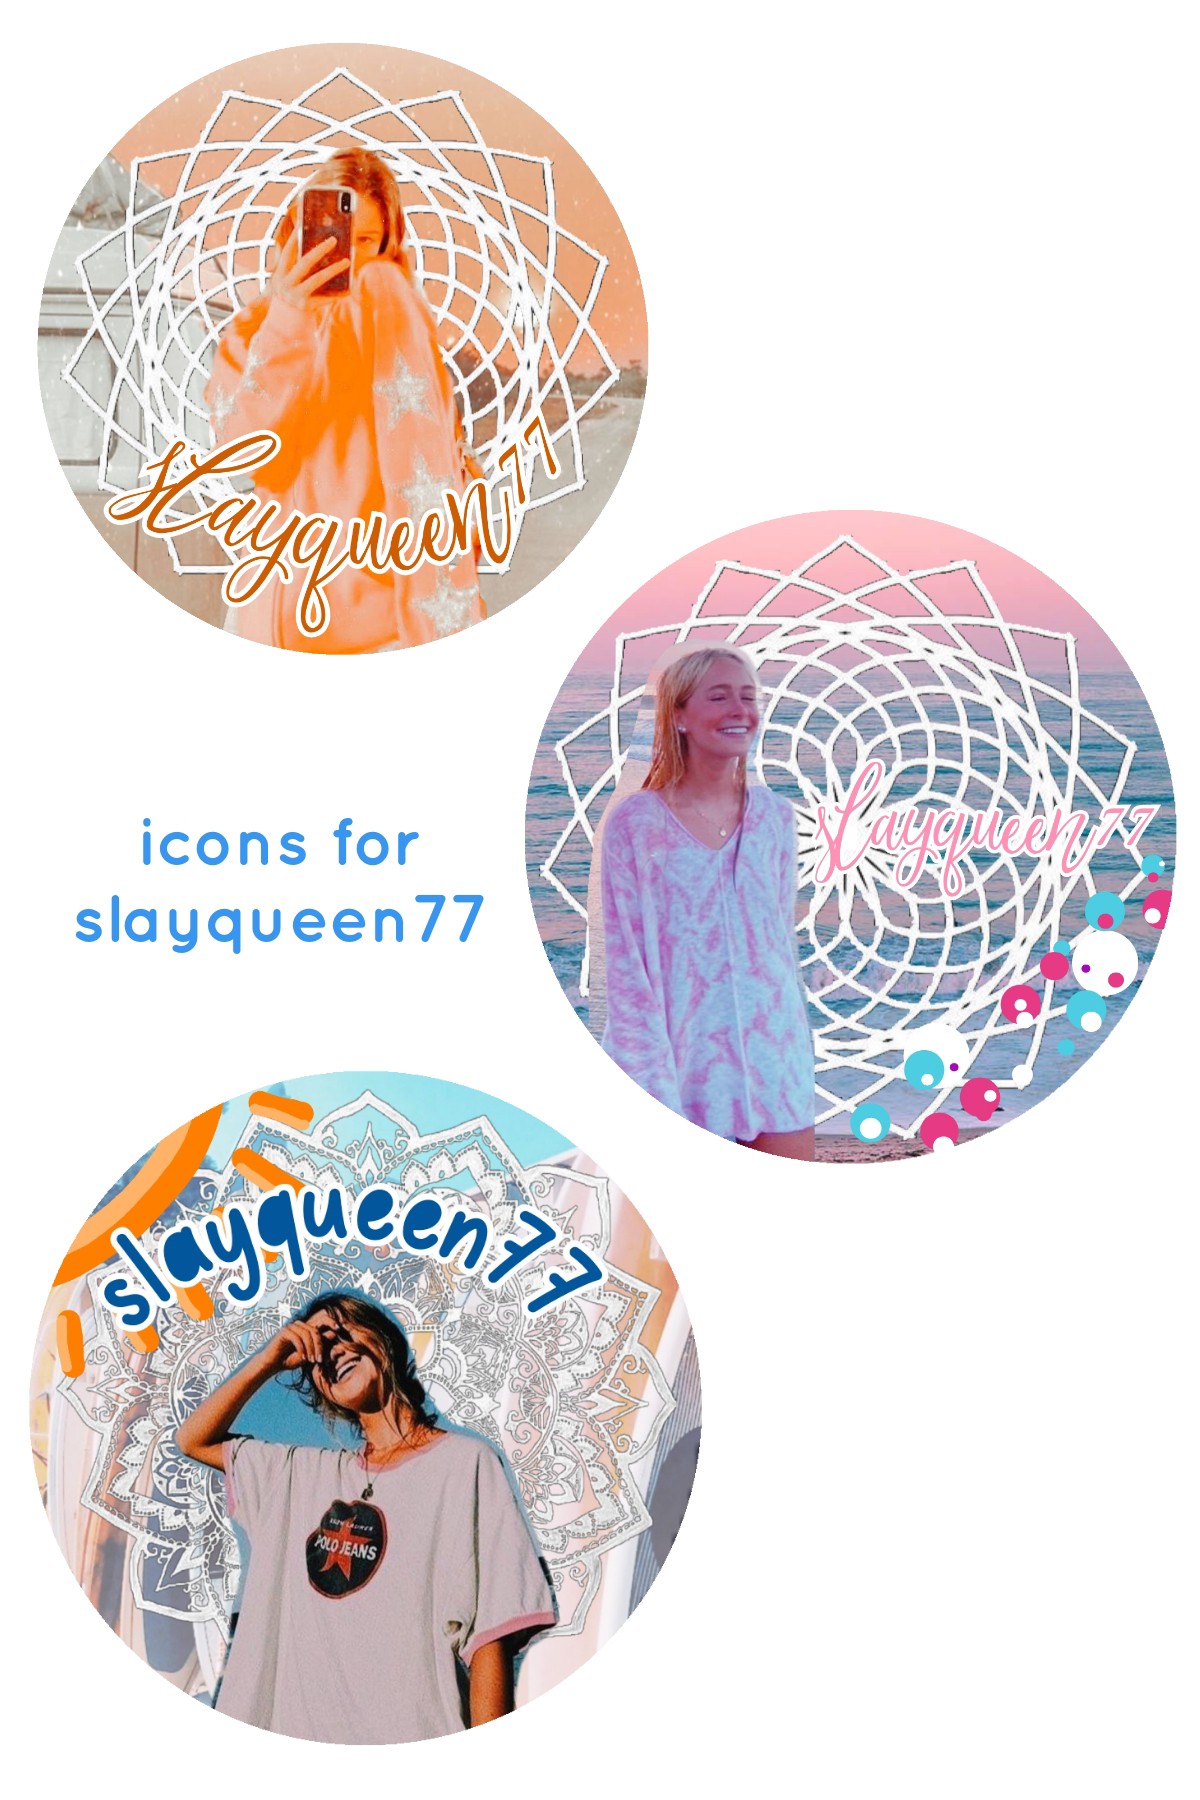 icons for slayqueen77
|| Sign up for icons on my form ||